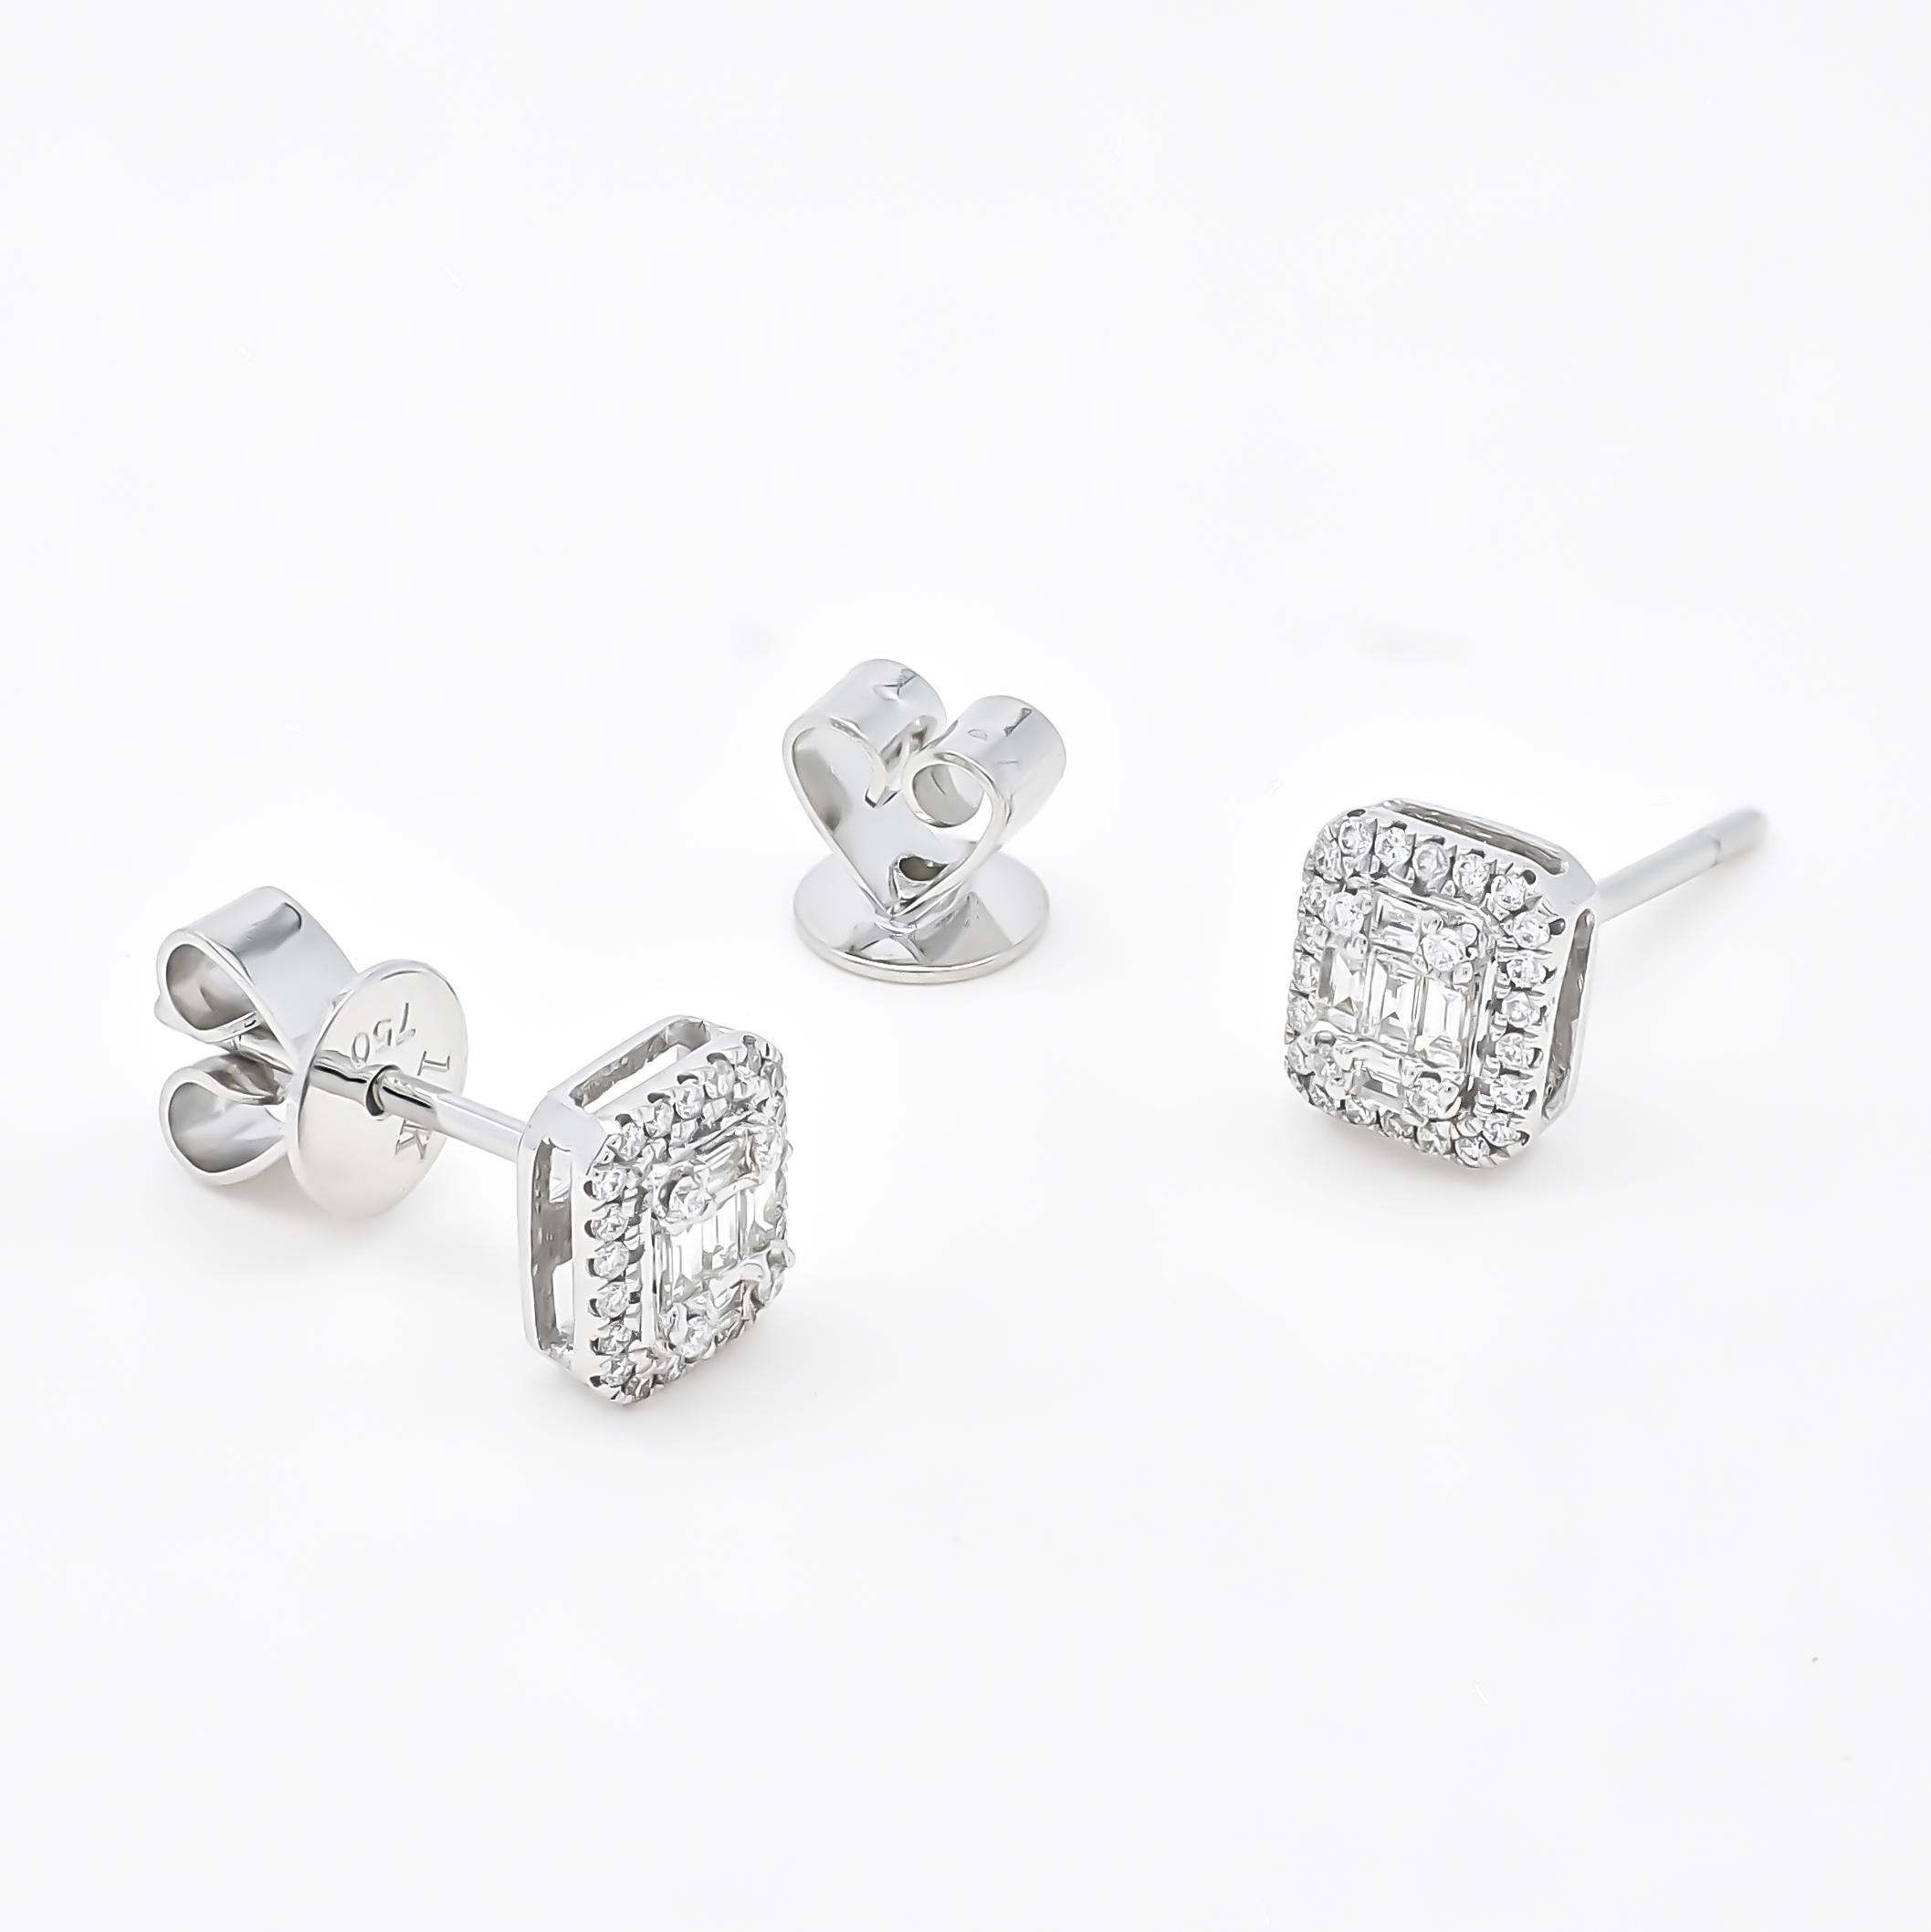 Introducing these exquisite round and baguette diamond cluster stud earrings that emit an air of dazzling energy. With a minimalistic design, they offer a perfect balance of sophistication and sparkle.

The beauty of these earrings lies in their